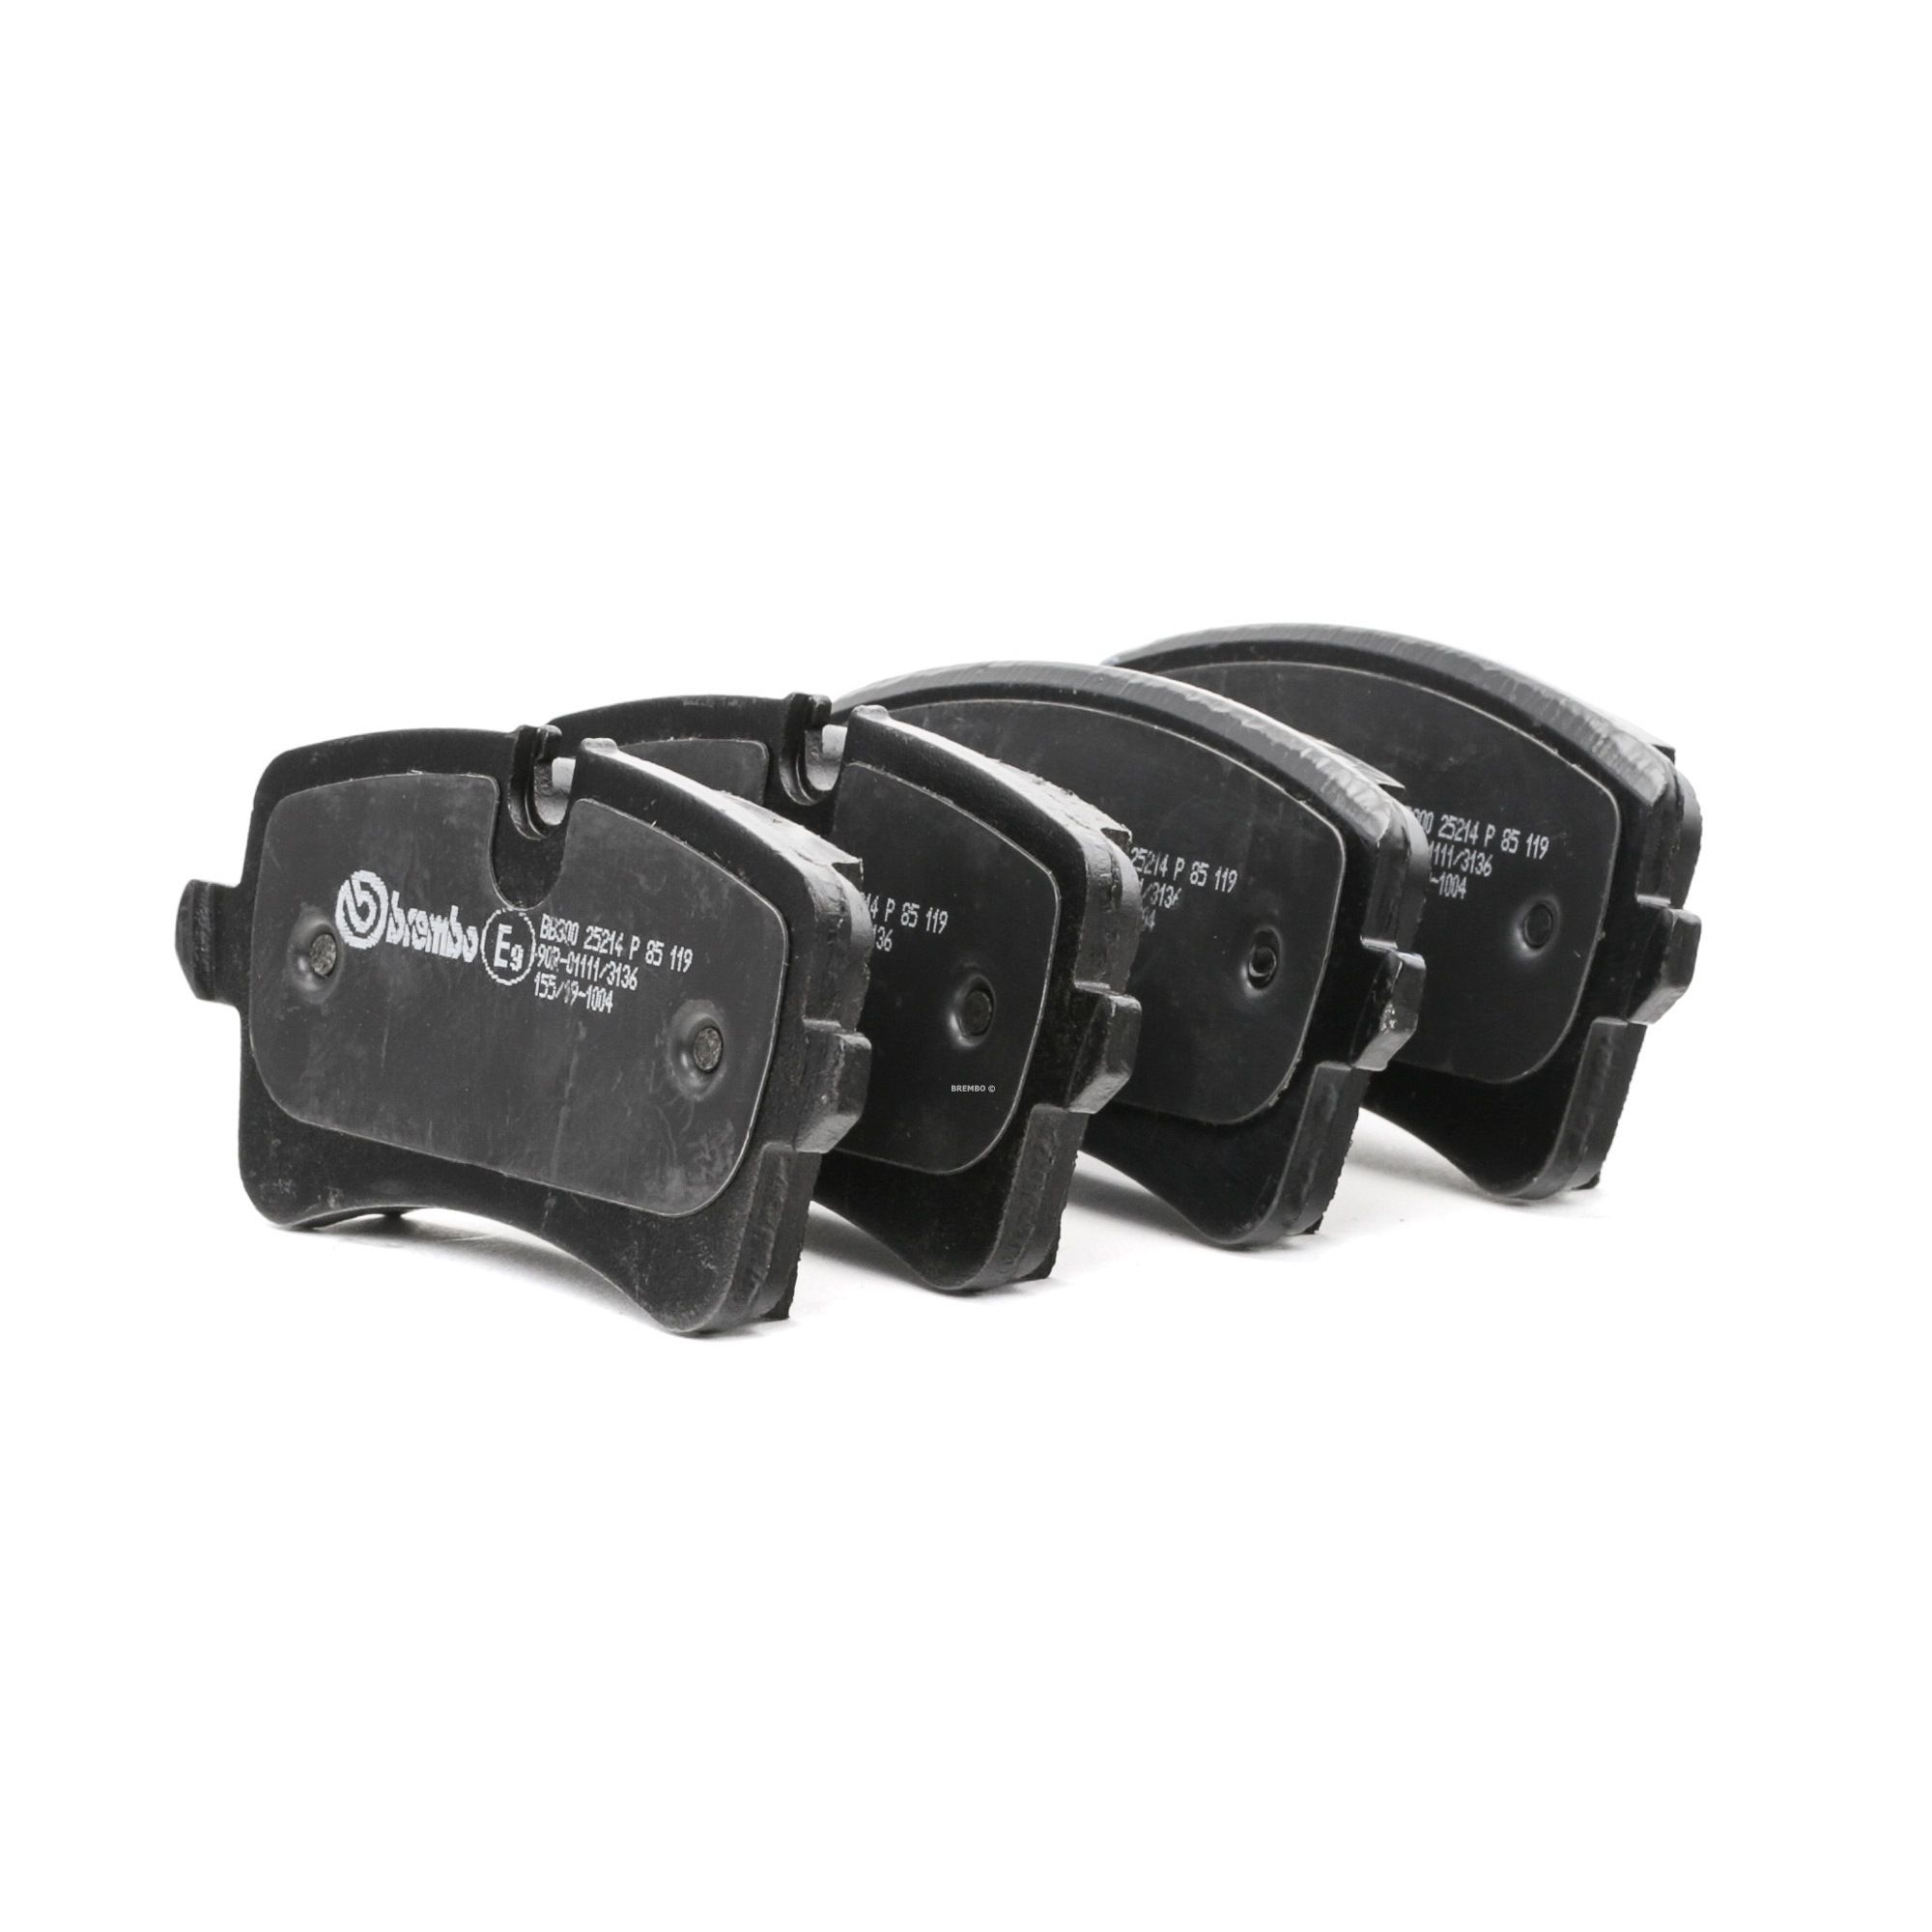 BREMBO P 85 119 Brake pad set incl. wear warning contact, with brake caliper screws, with accessories